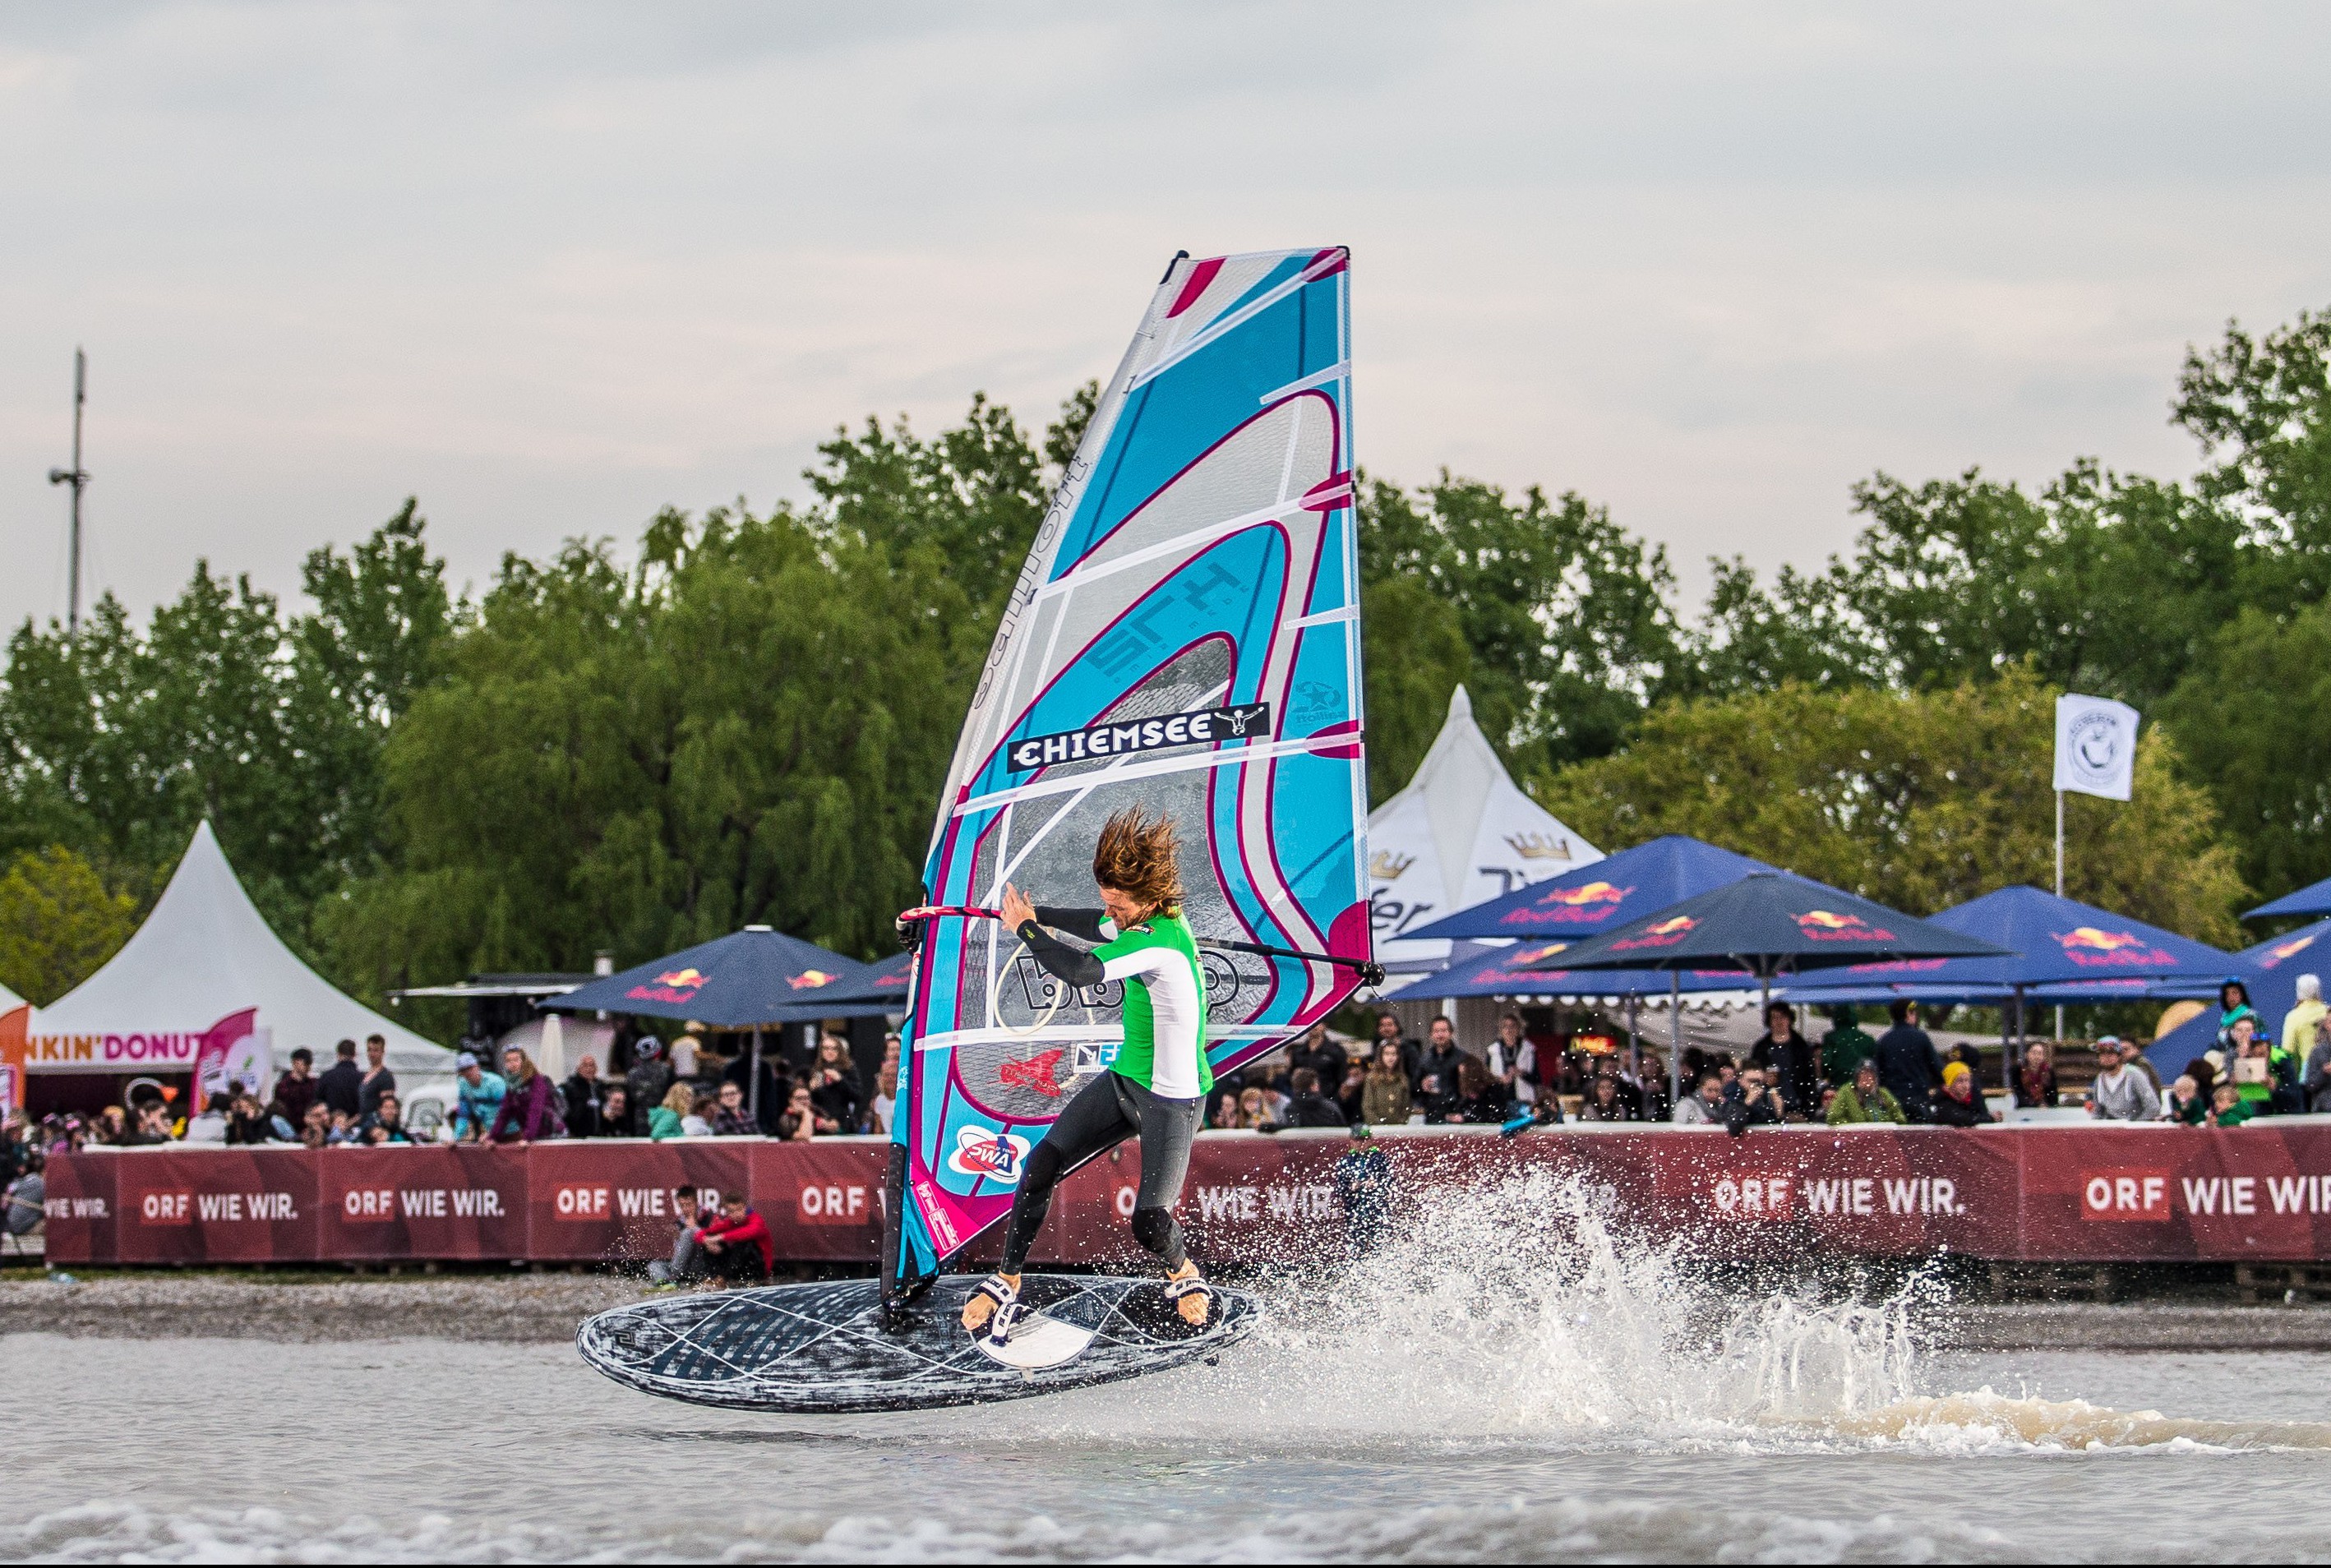 All eyes on the Chiemsee Tow-In qualifiers in Podersdorf 2015